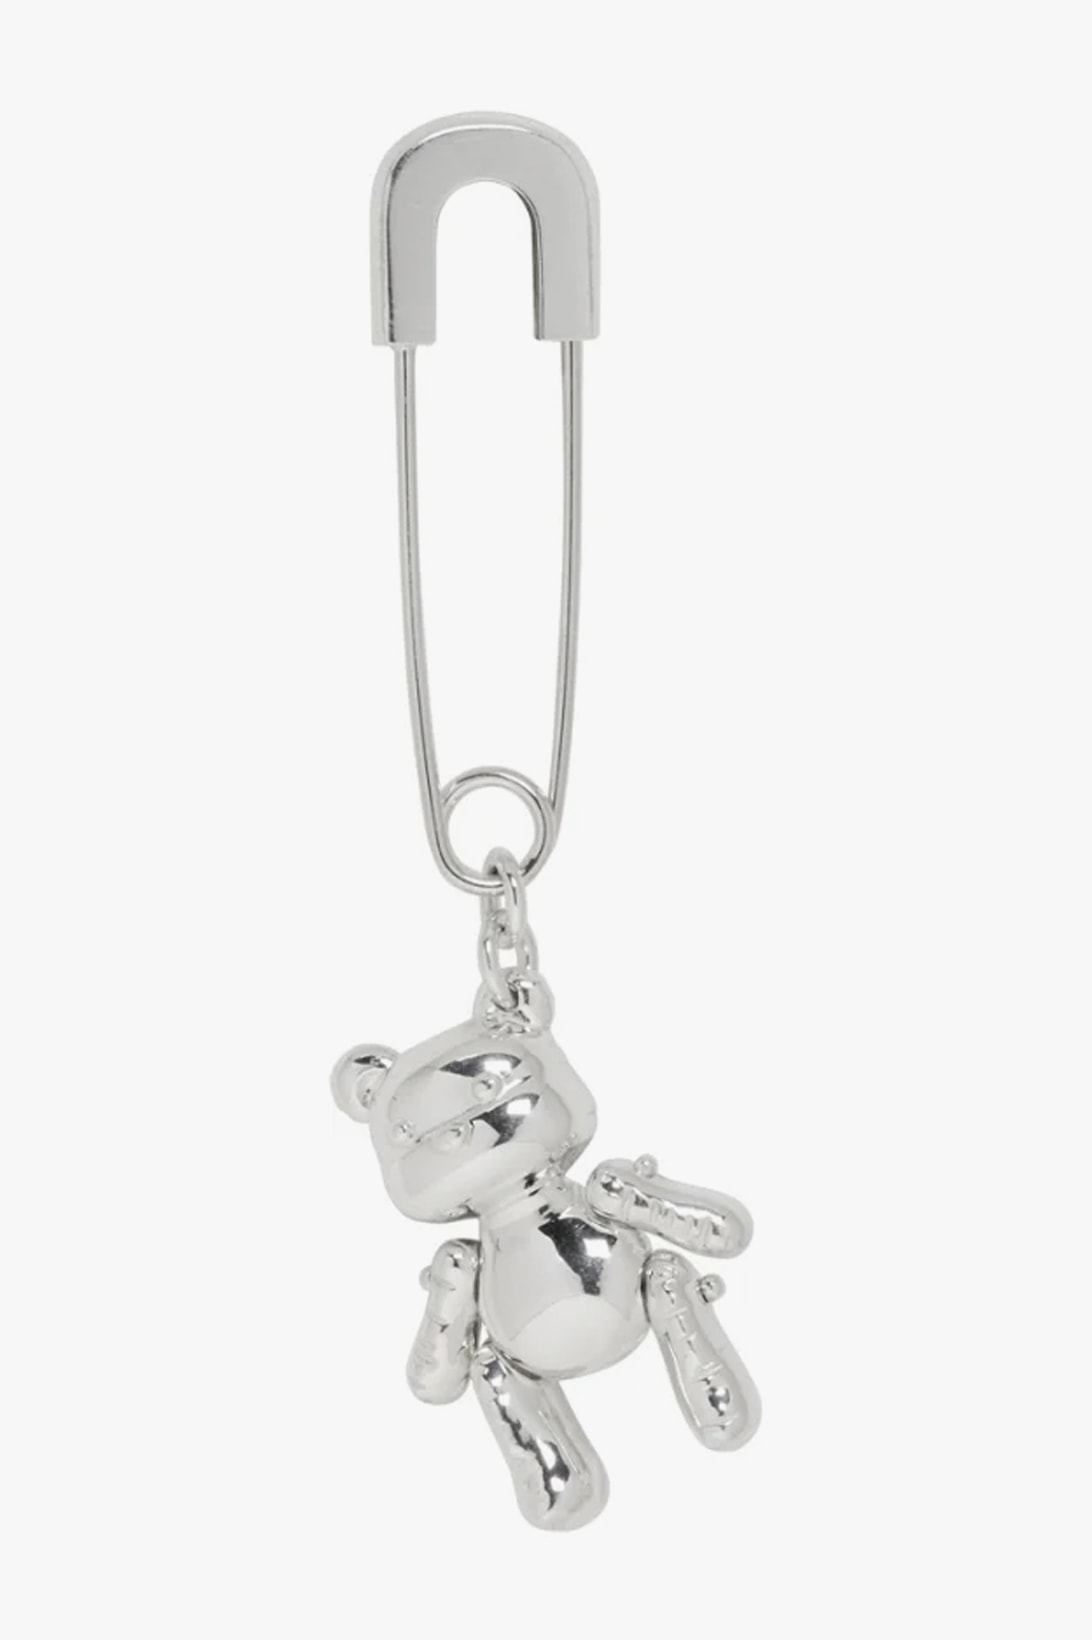 AMBUSH Silver Earrings Necklaces Safety Pin Bunny Teddy Bear Purple Lighter Jewelry Accessories